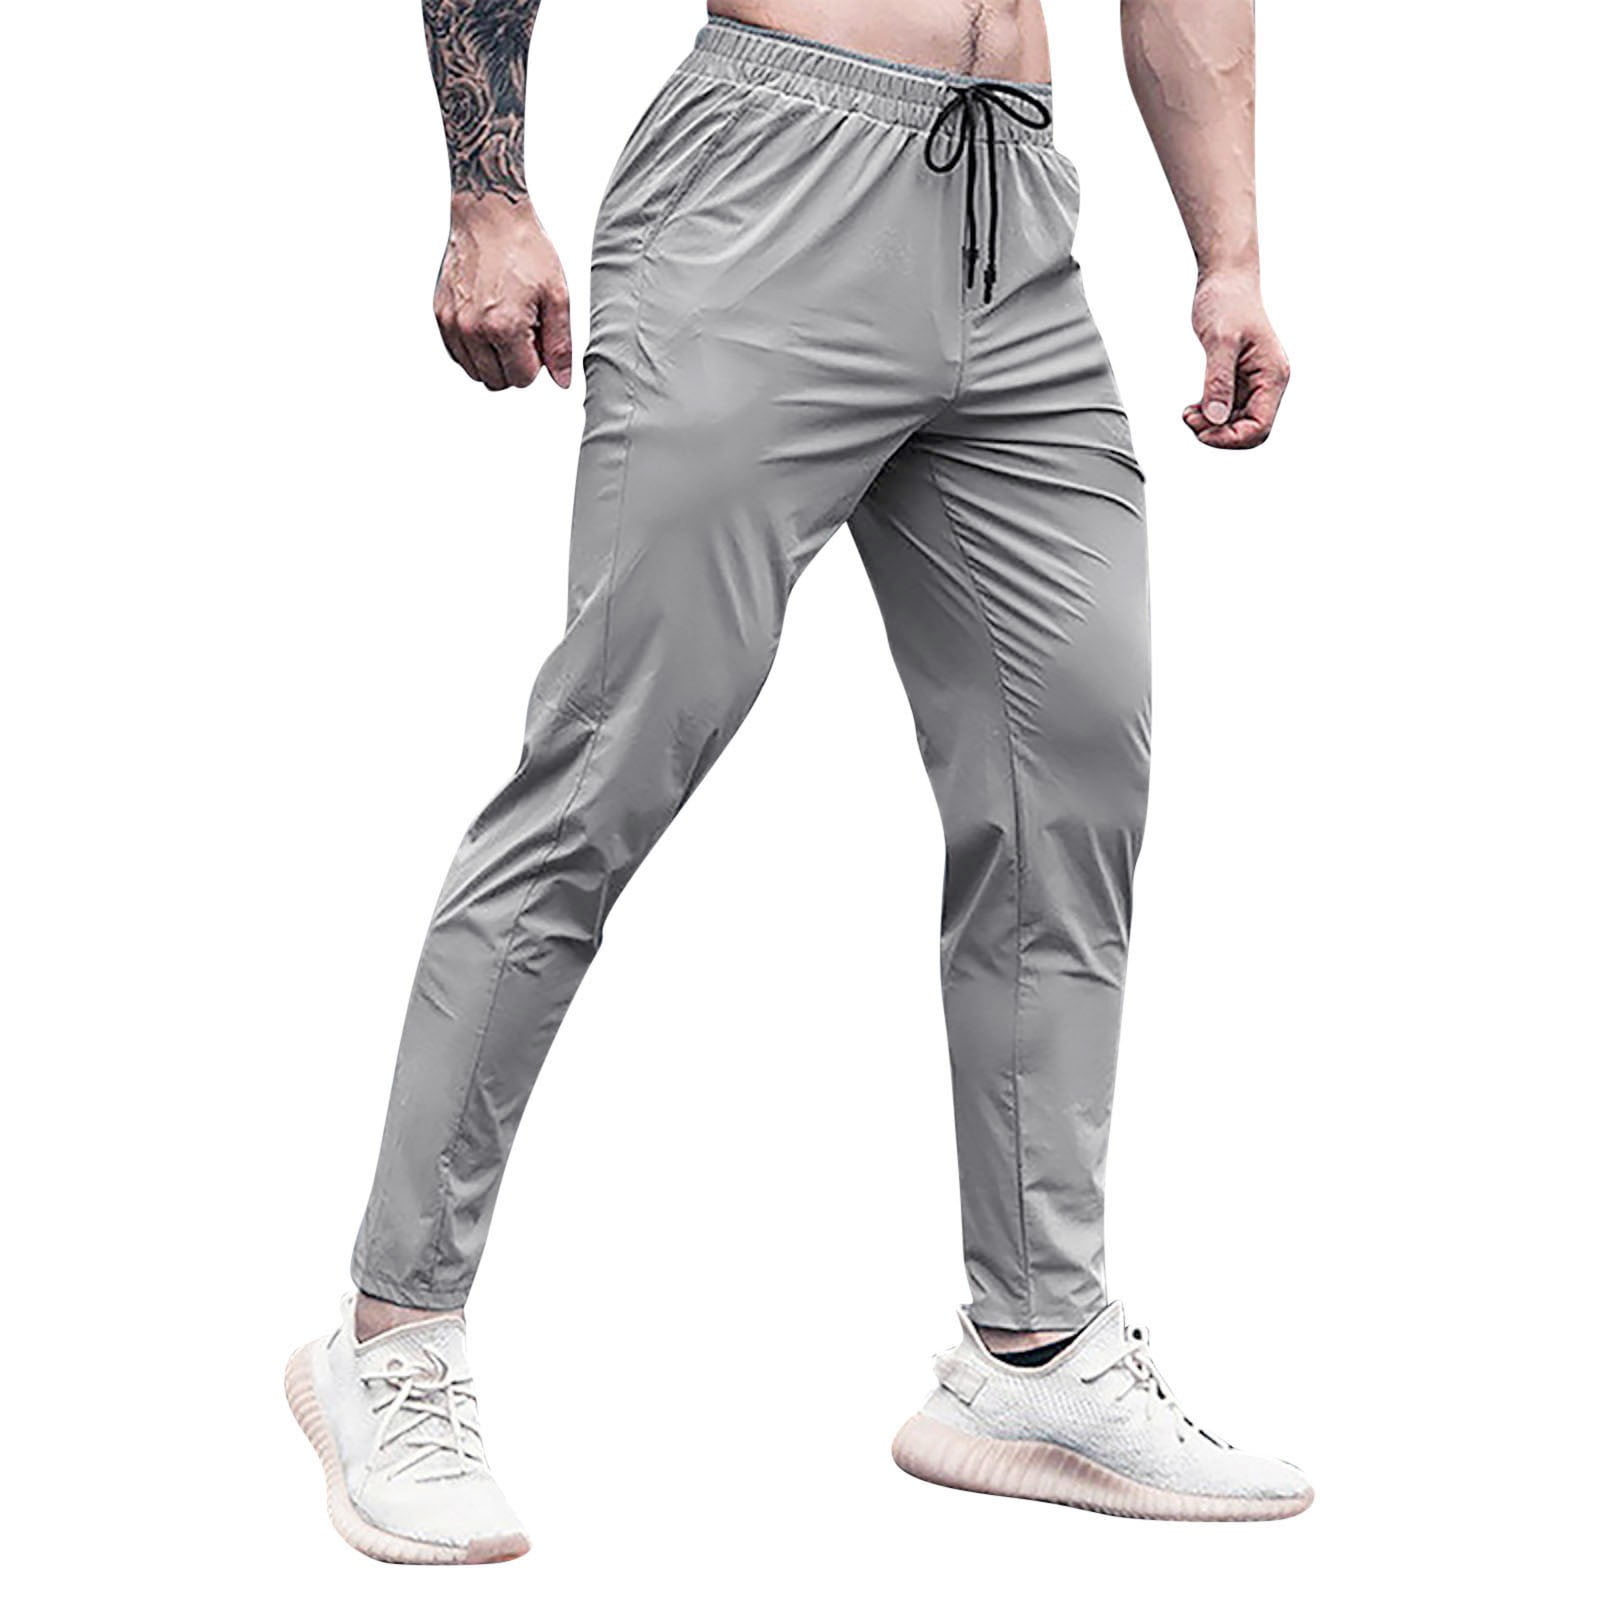 Leey-world Gifts for Men Sweatpants with Pockets Zipper, Cruise Sweatpants for Men, Joggers for Men Slim Fit, Mens Joggers for Workout Khaki,3XL